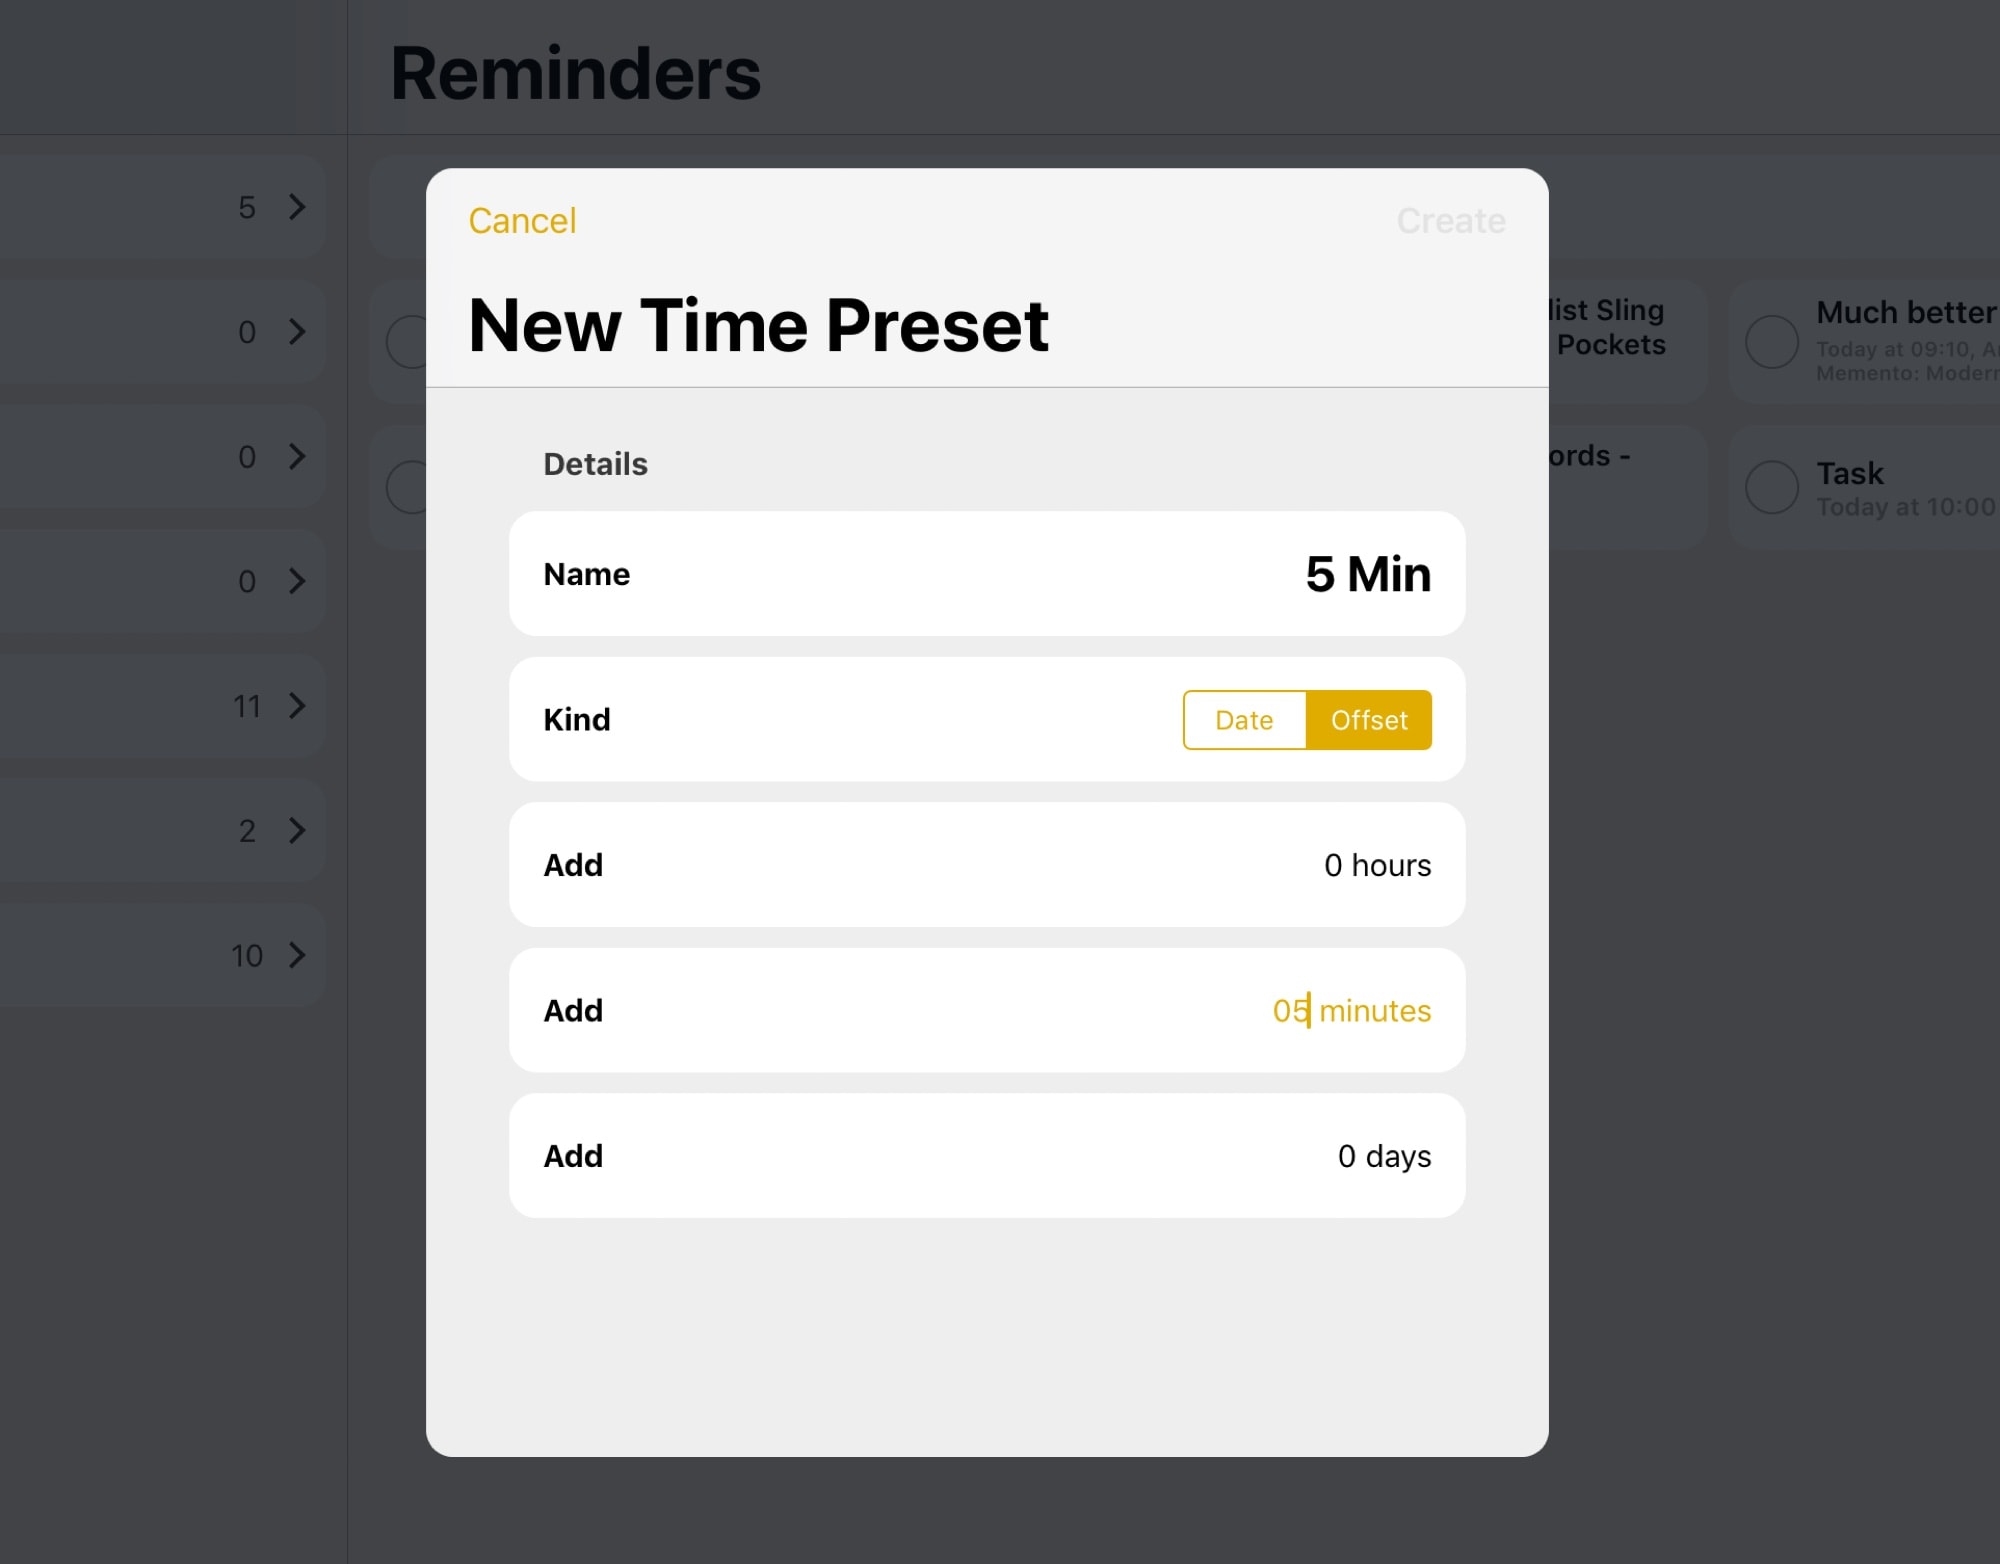 Creating new timer presets is simple with the Memento reminders app.